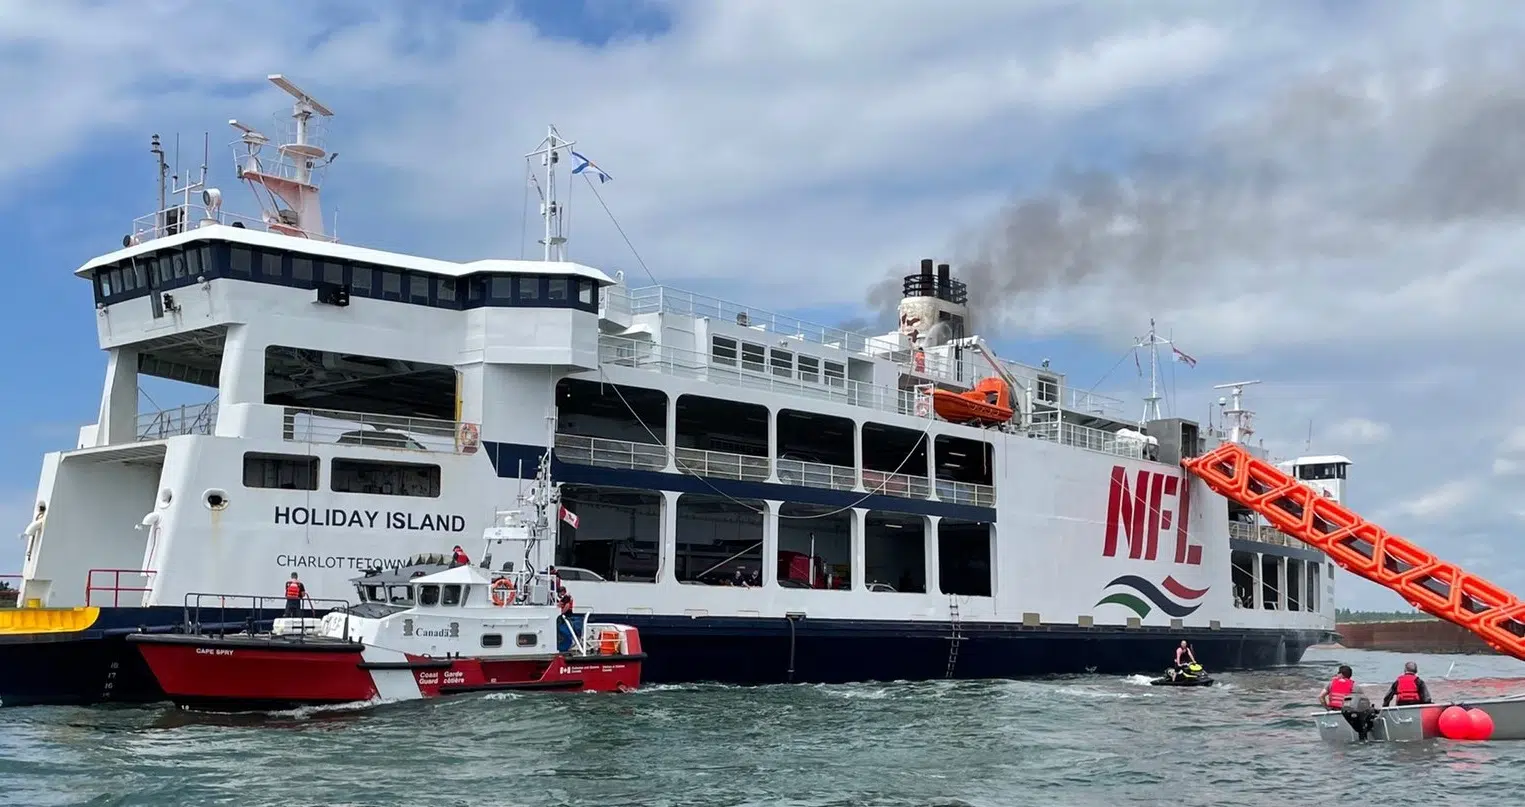 Fire continues to burn on P.E.I.-N.S. ferry